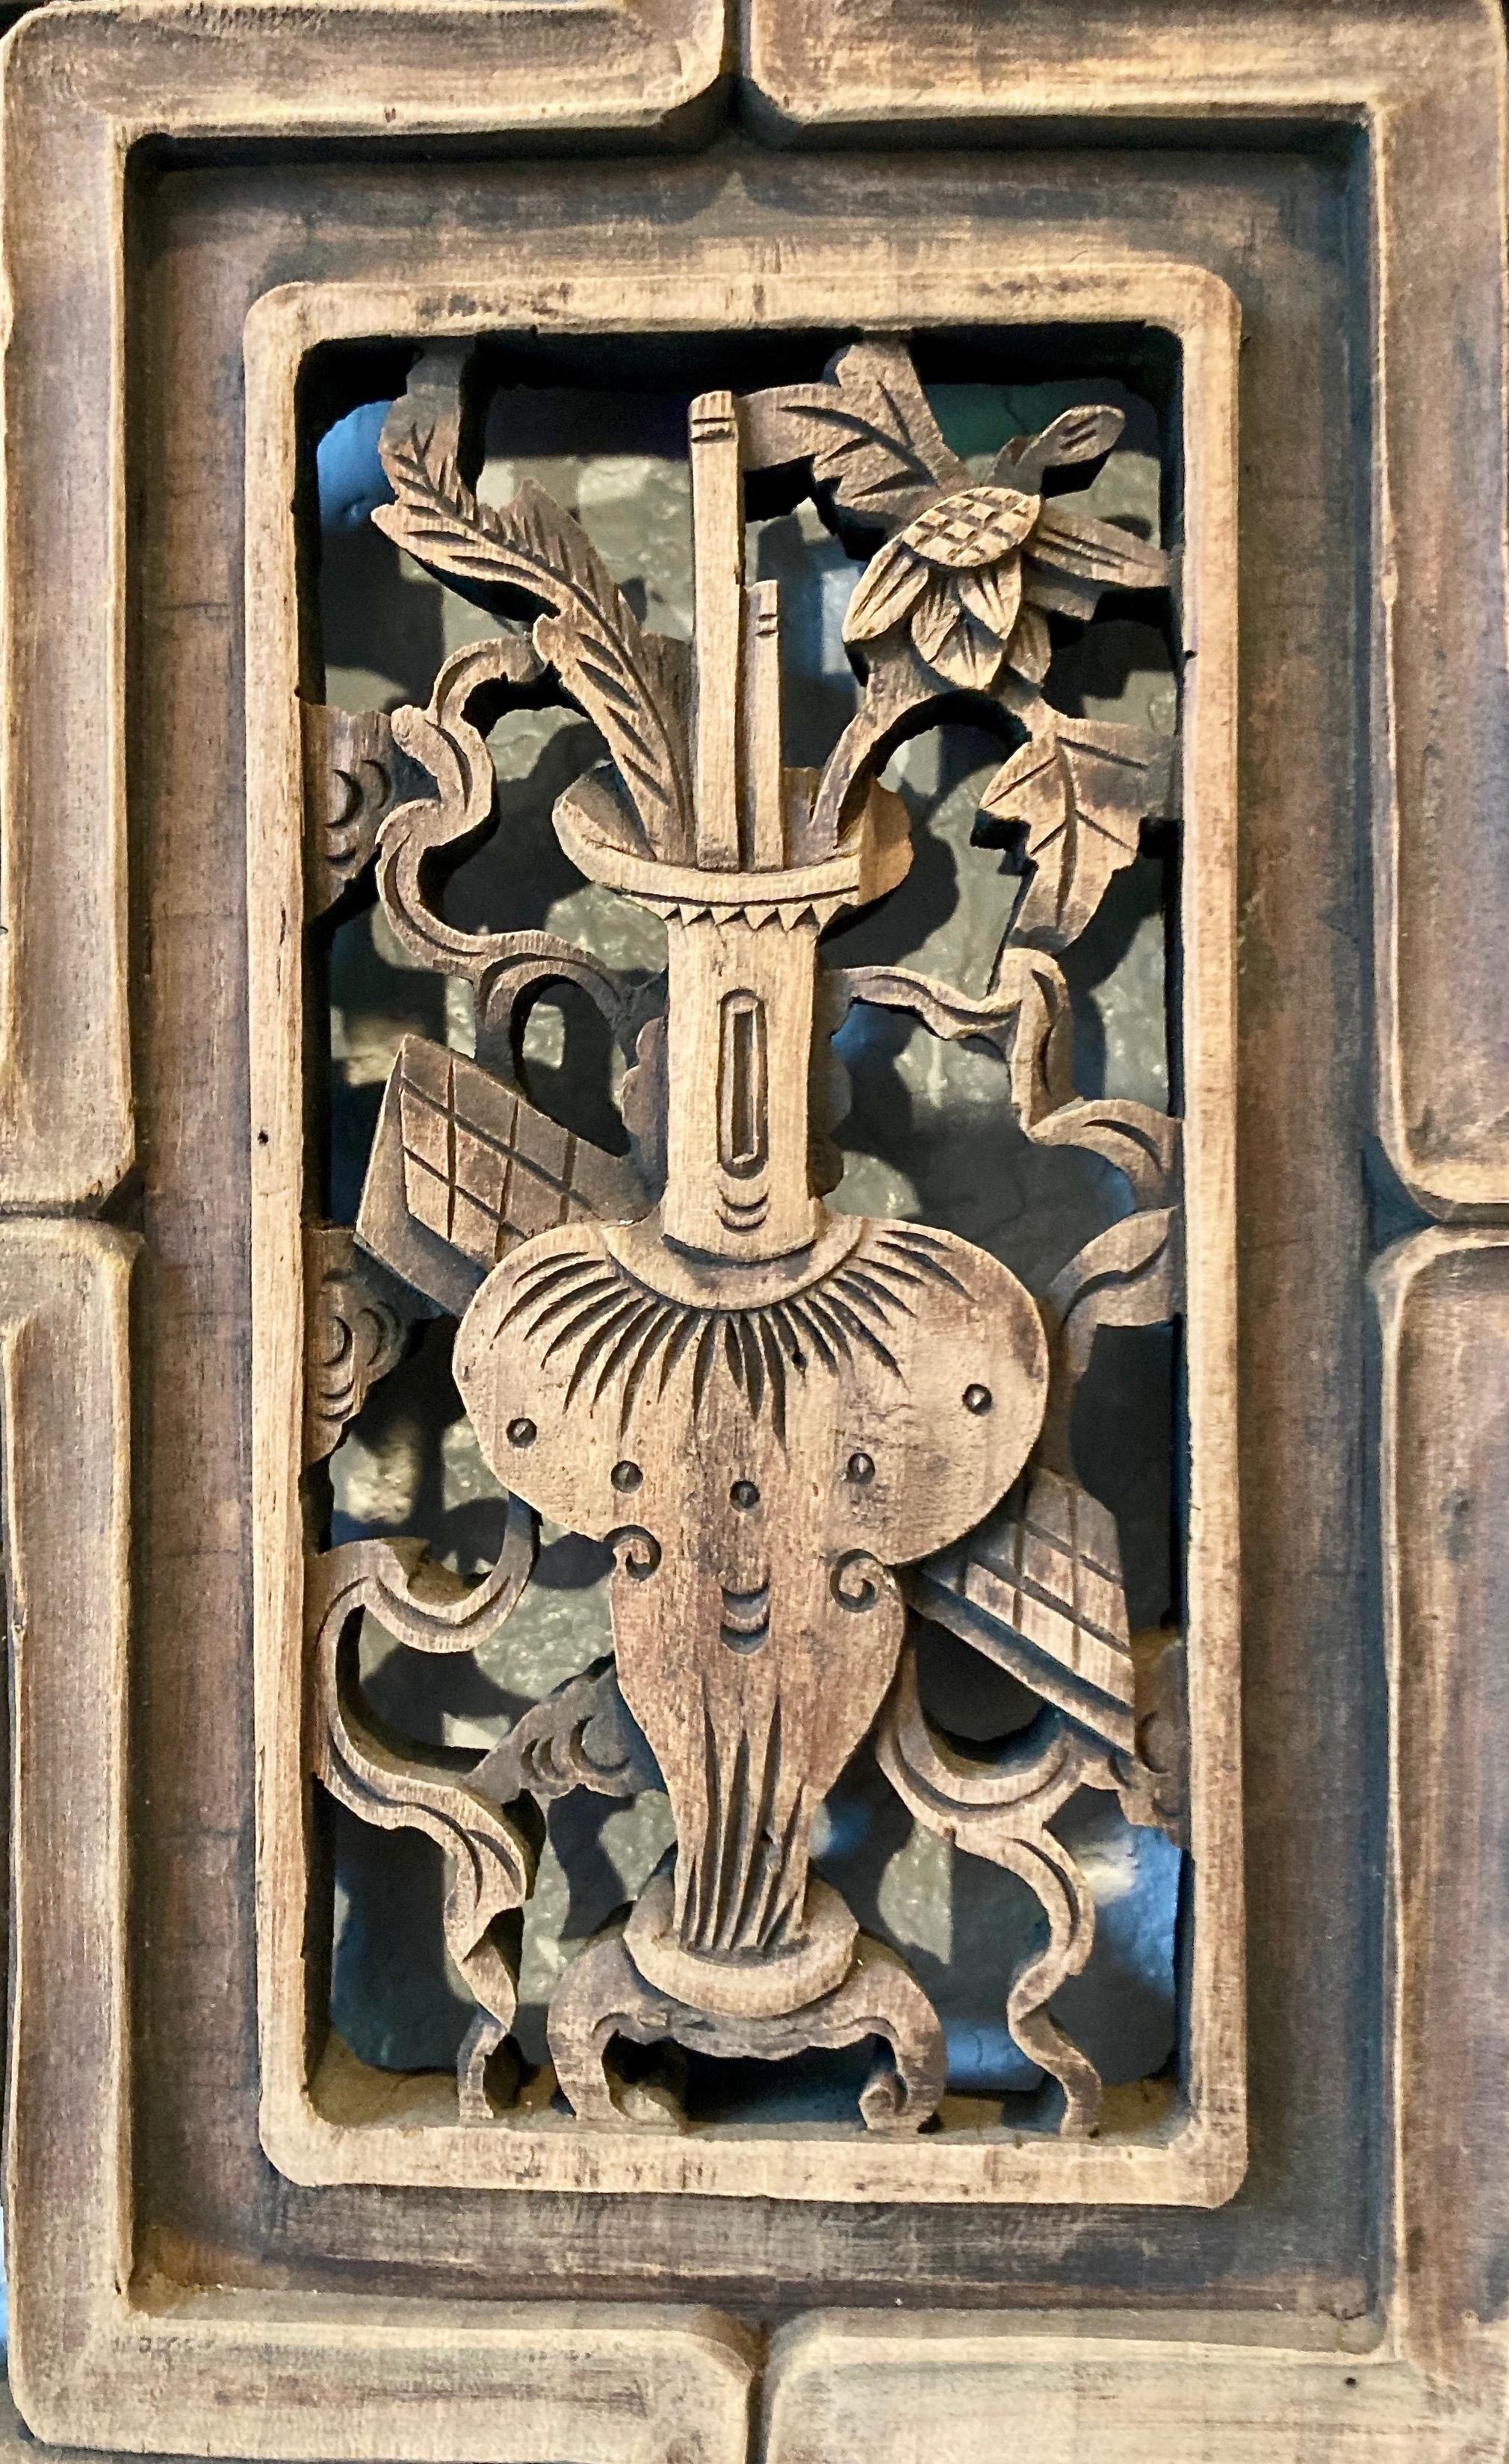 Thick framed panel with three panes, openwork and relief carvings. Rectangular center carving with vase/floral motif. Bottom pane with plant/bird motif.